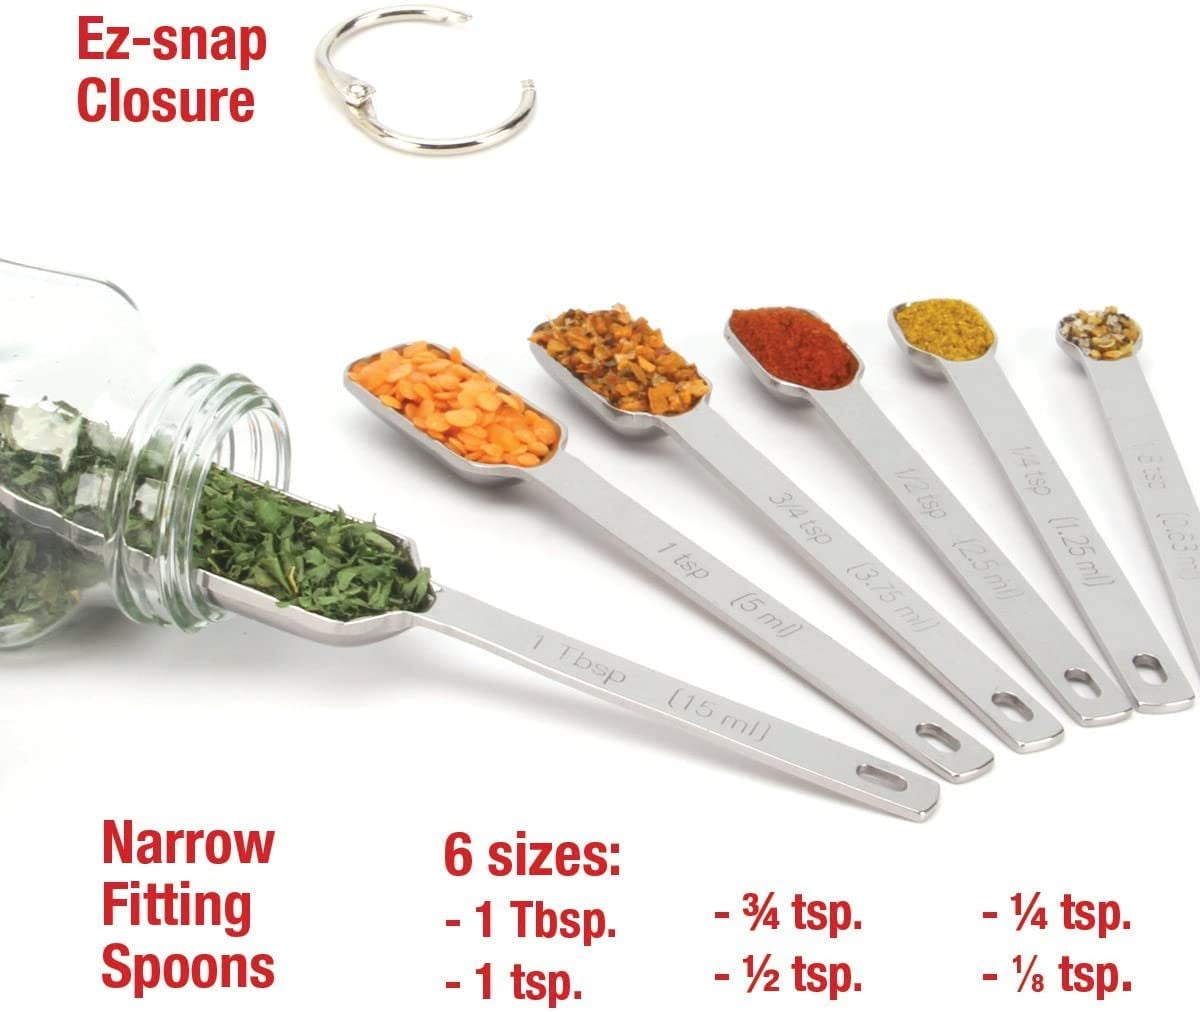 Measuring Spoons, Measuring Spoons Set, AOOSY 7-Piece Heavy Duty Stainless  Steel Tablespoon Measure Spoon,Removable Small Teaspoon for Dry and Liquid